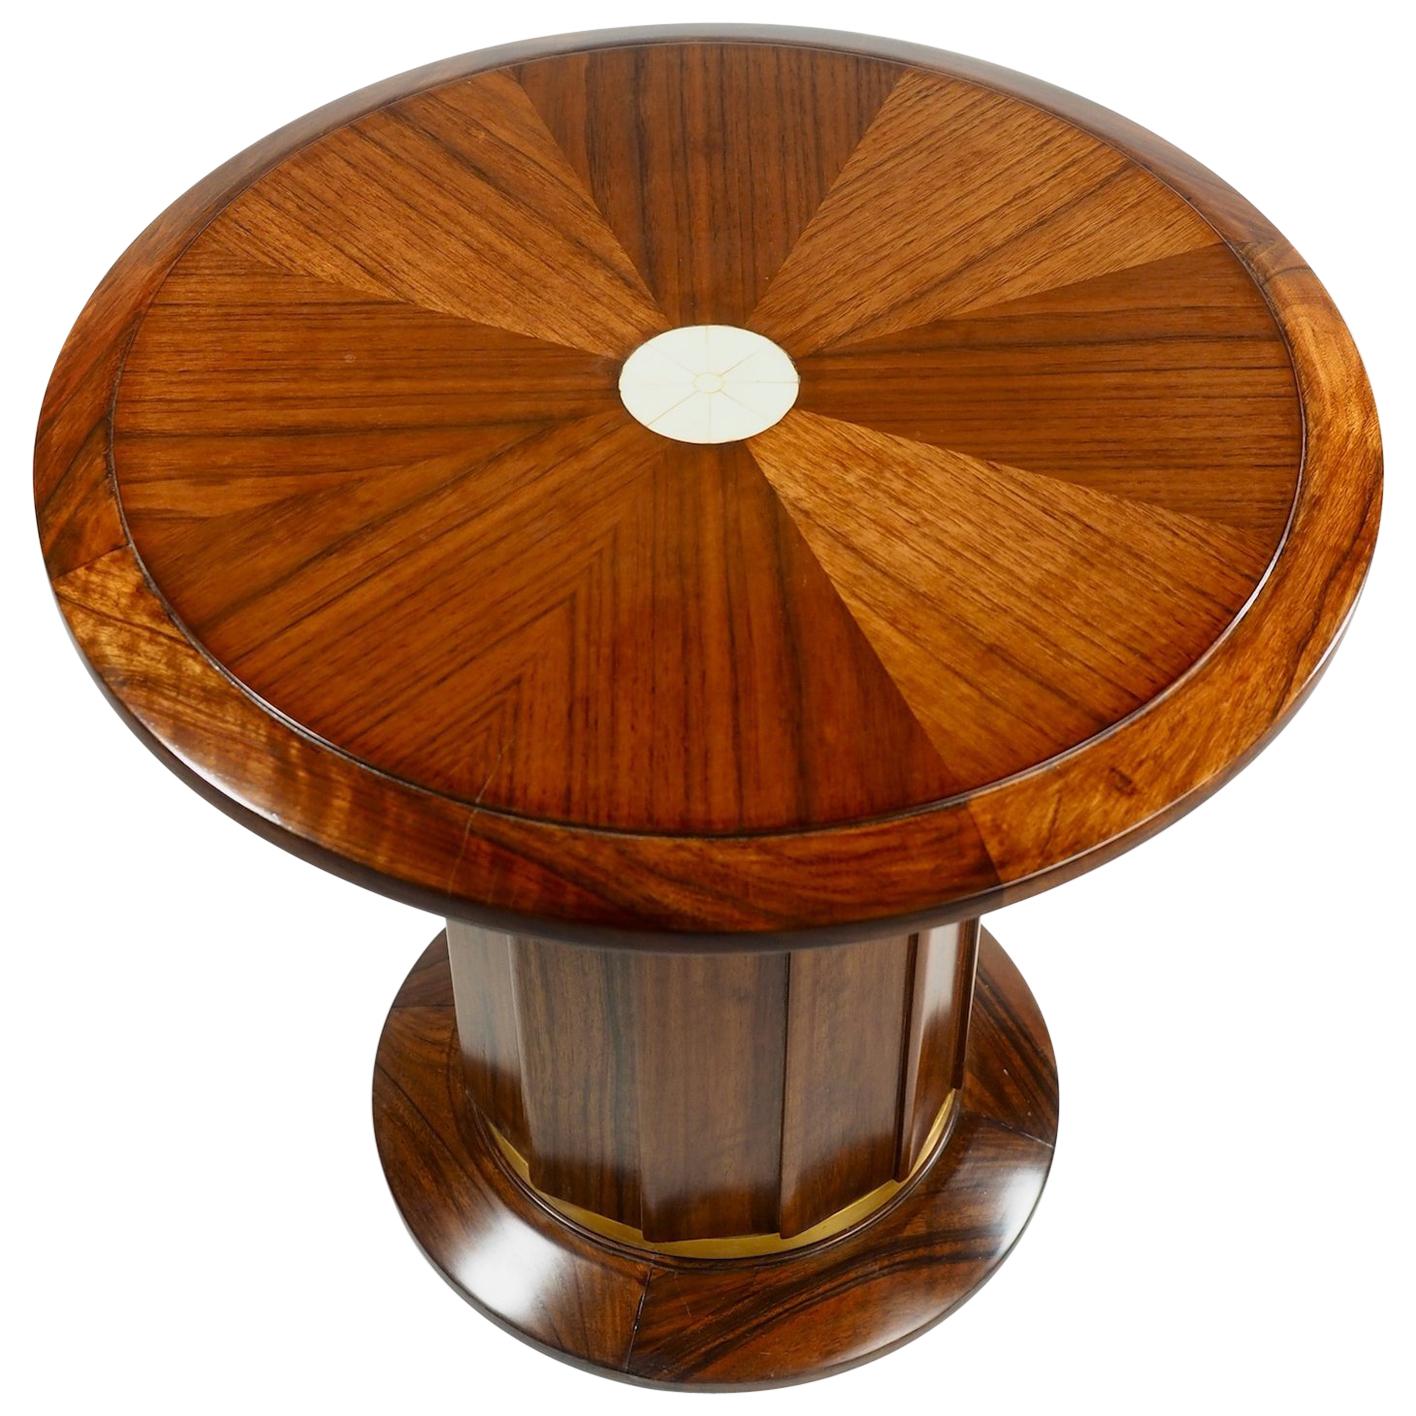 French modernist Art Deco side/end table in rosewood and bronze with inlaid bone top. Documented (this table) in Dominique/ Andre Domin & Marcel Genevriere, by Felix Marcilhac, les Editions de l'Amateur, 2008, page 54. See last photo. Restored and